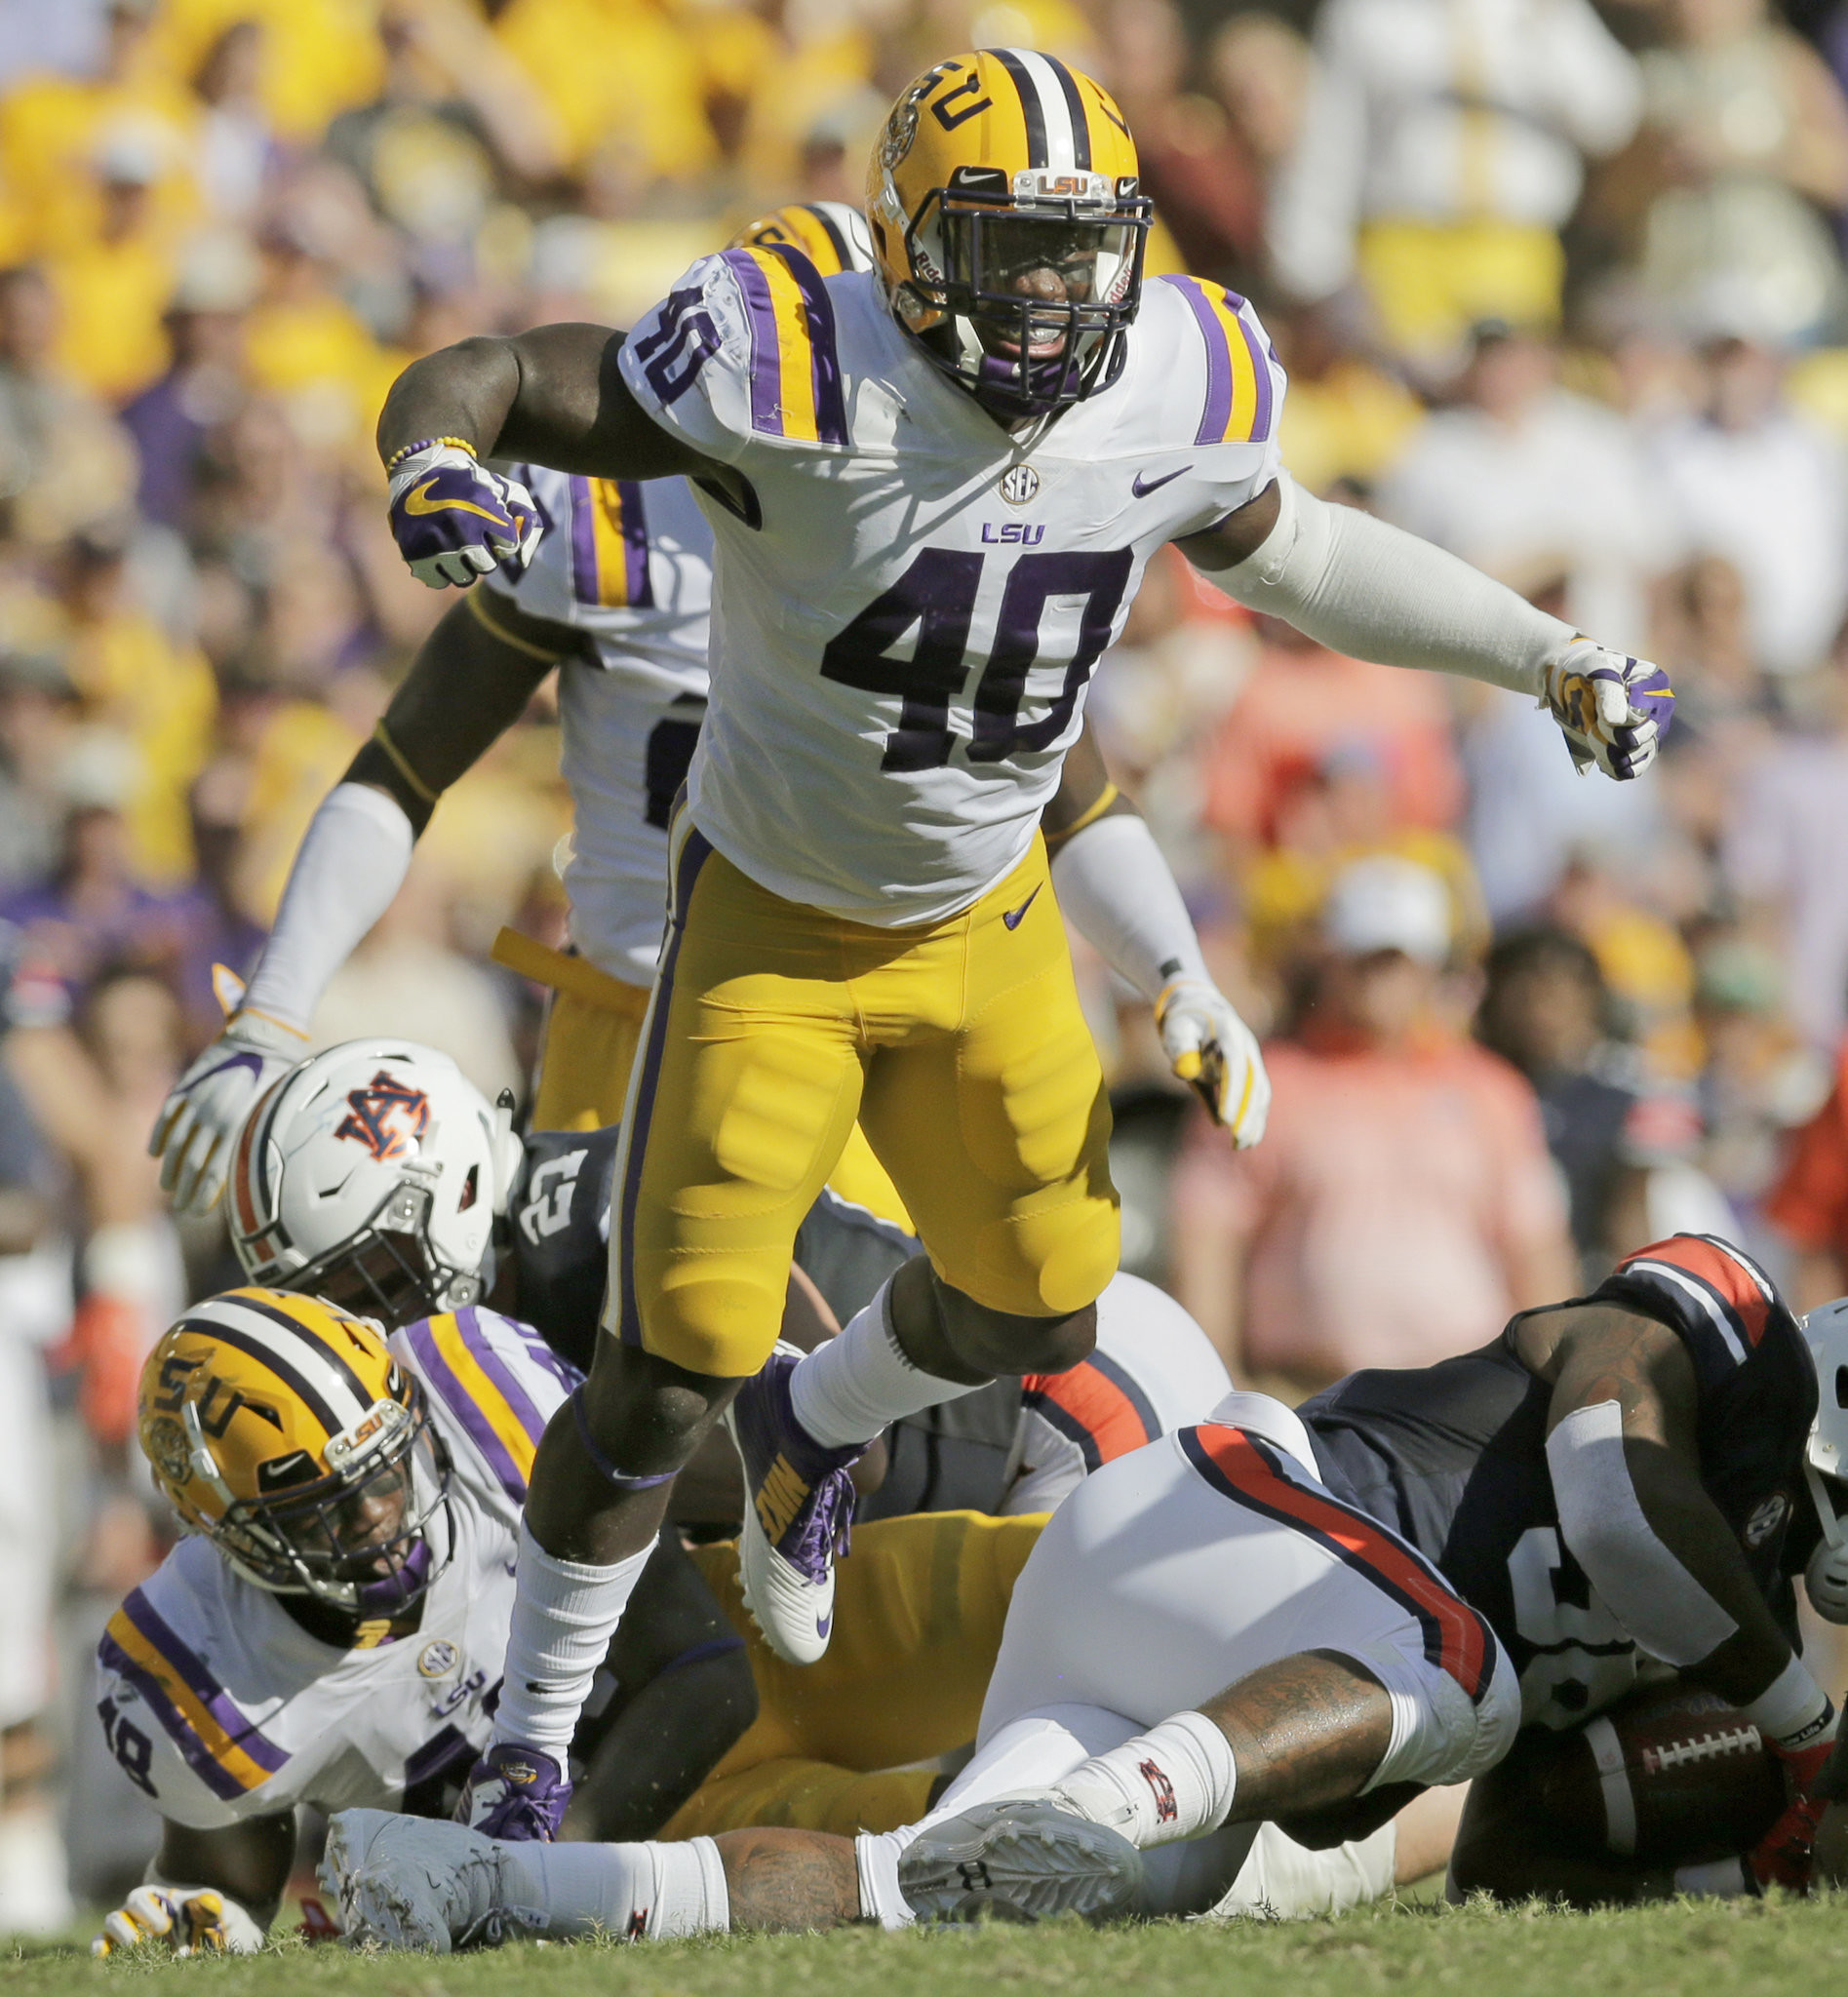 1895x2048 LSU linebacker Devin White named 2nd-team All-American by FWAA